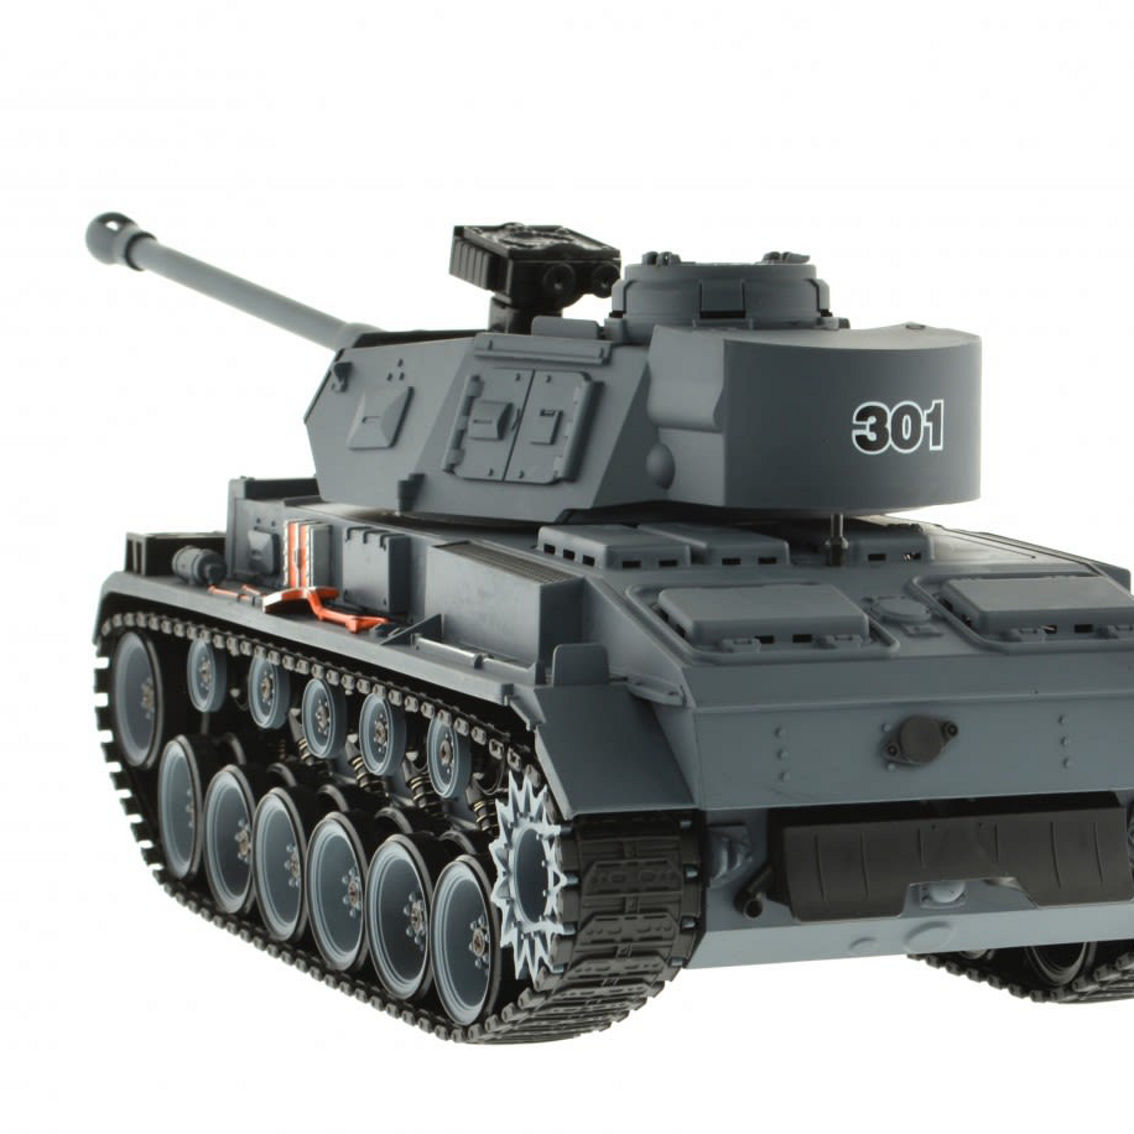 CIS-YZ-827 1:18 scale WWII German Panther III tank with lights sound and BB gun - Image 4 of 5